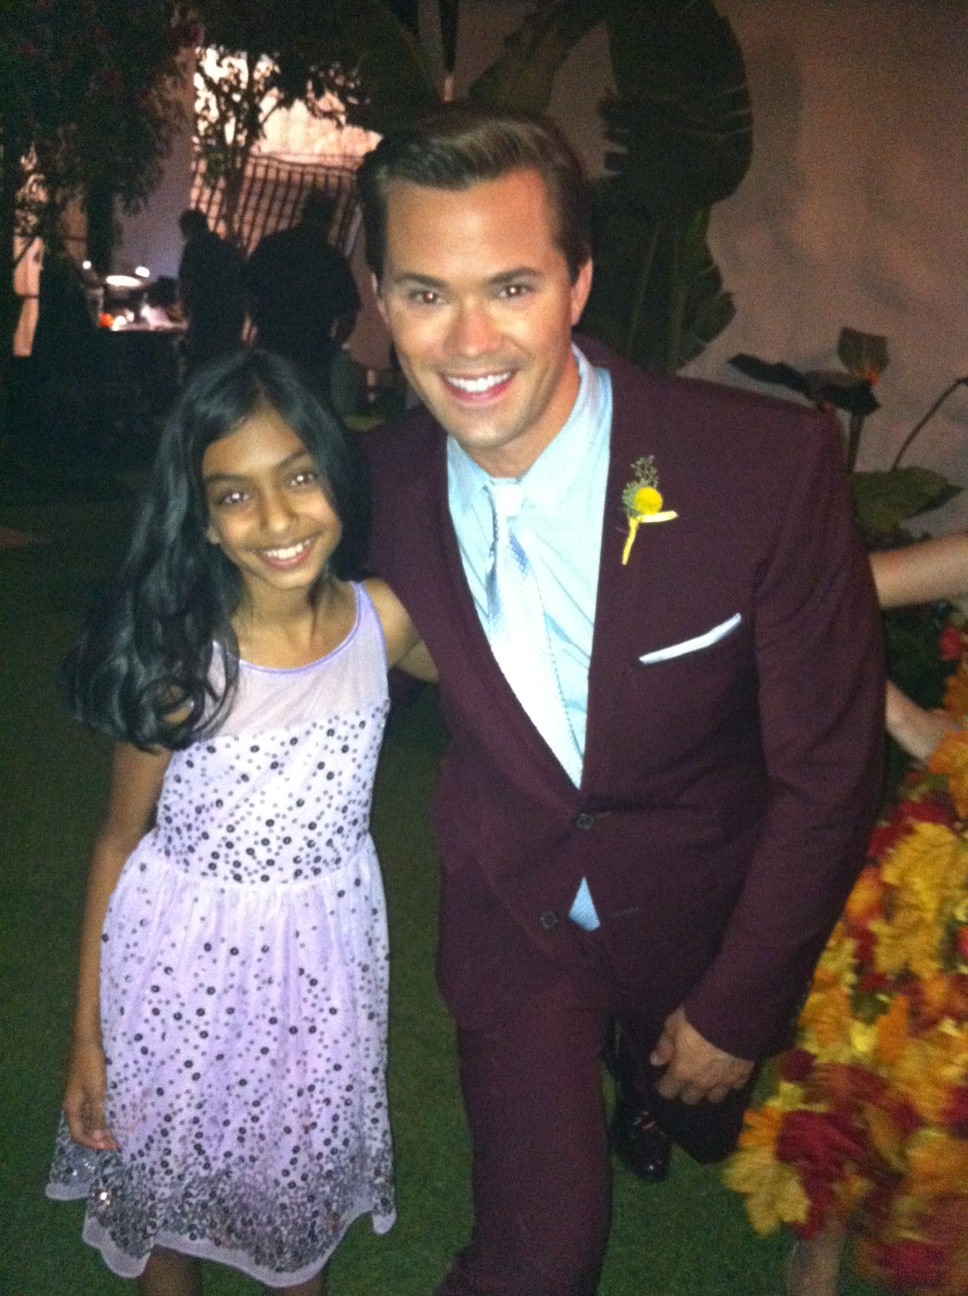 With Andrew Rannells.